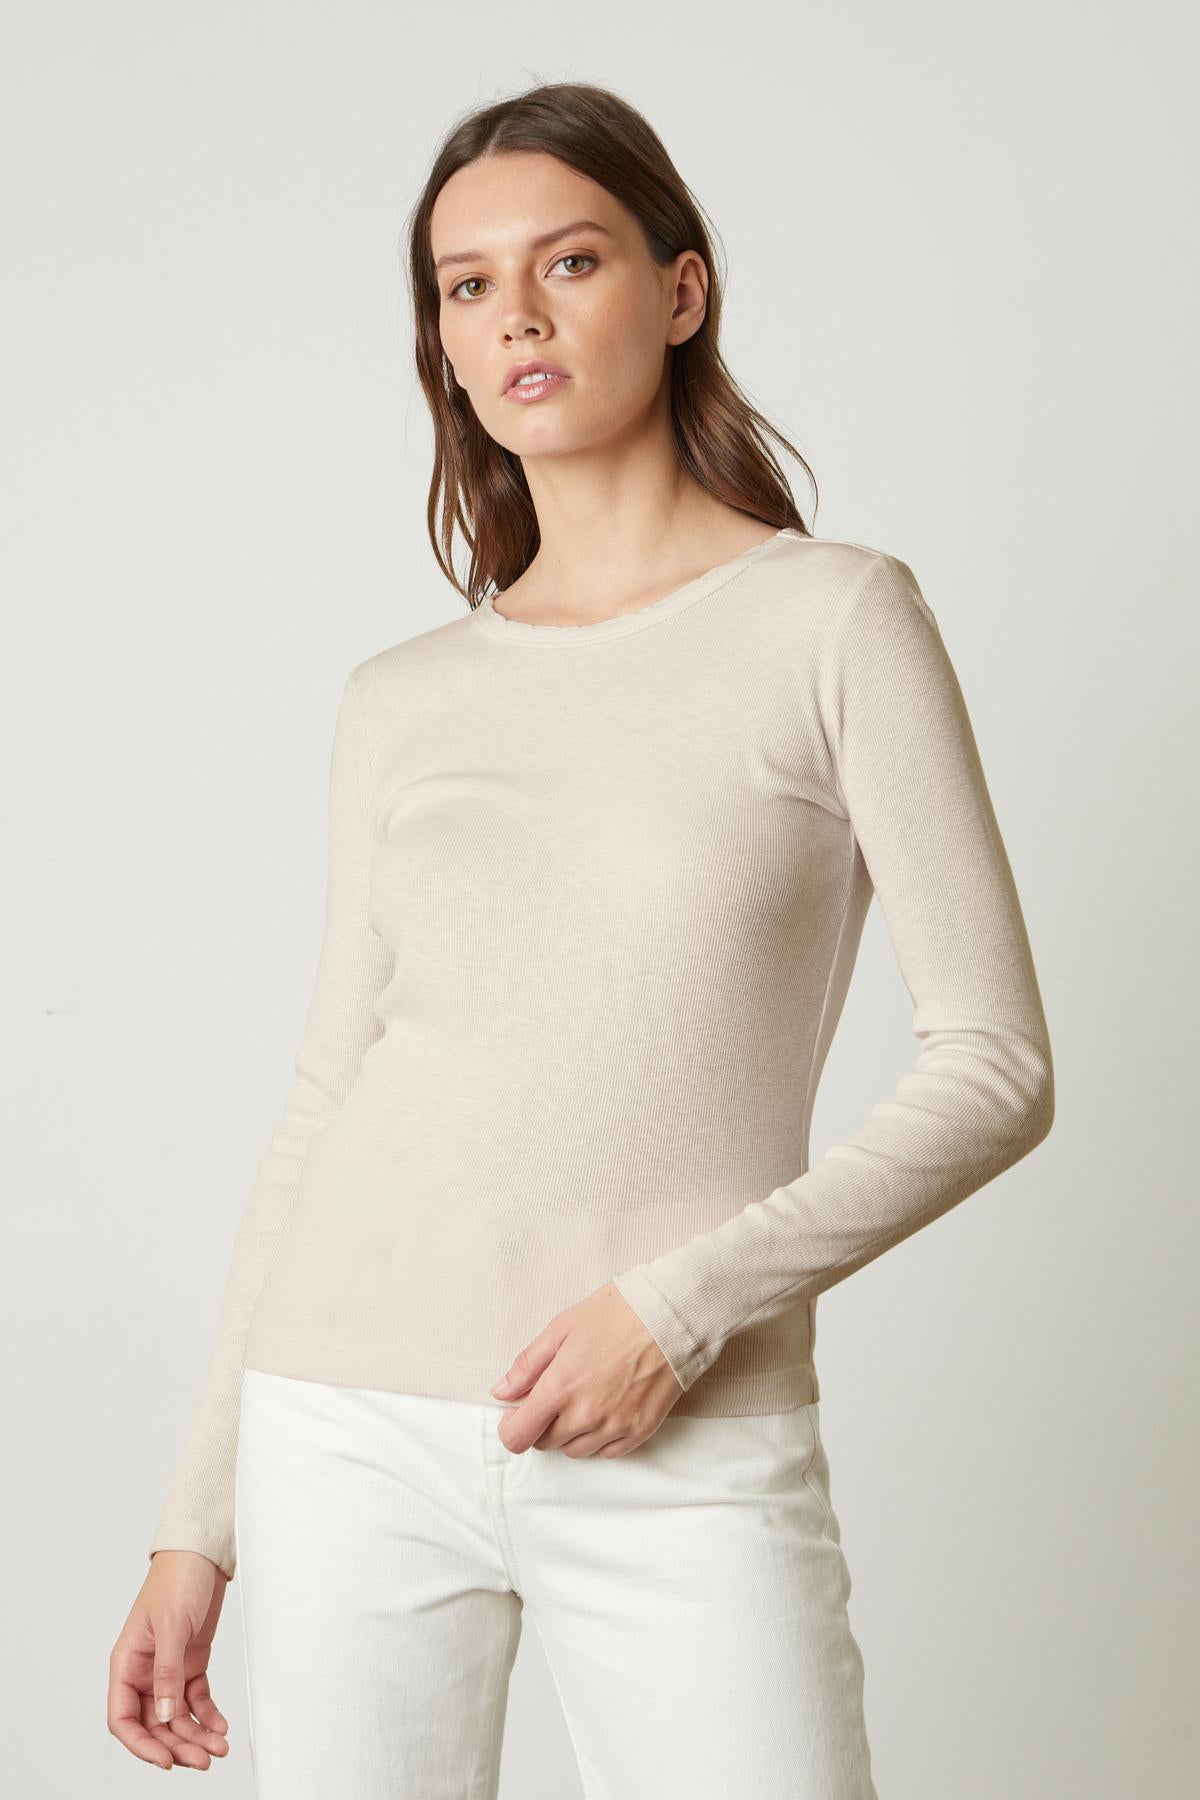 The model is wearing a rib-knit beige sweater and white jeans, perfect for layering over a Velvet by Graham & Spencer BAYLER RIBBED SCOOP NECK TEE.-35776210436289